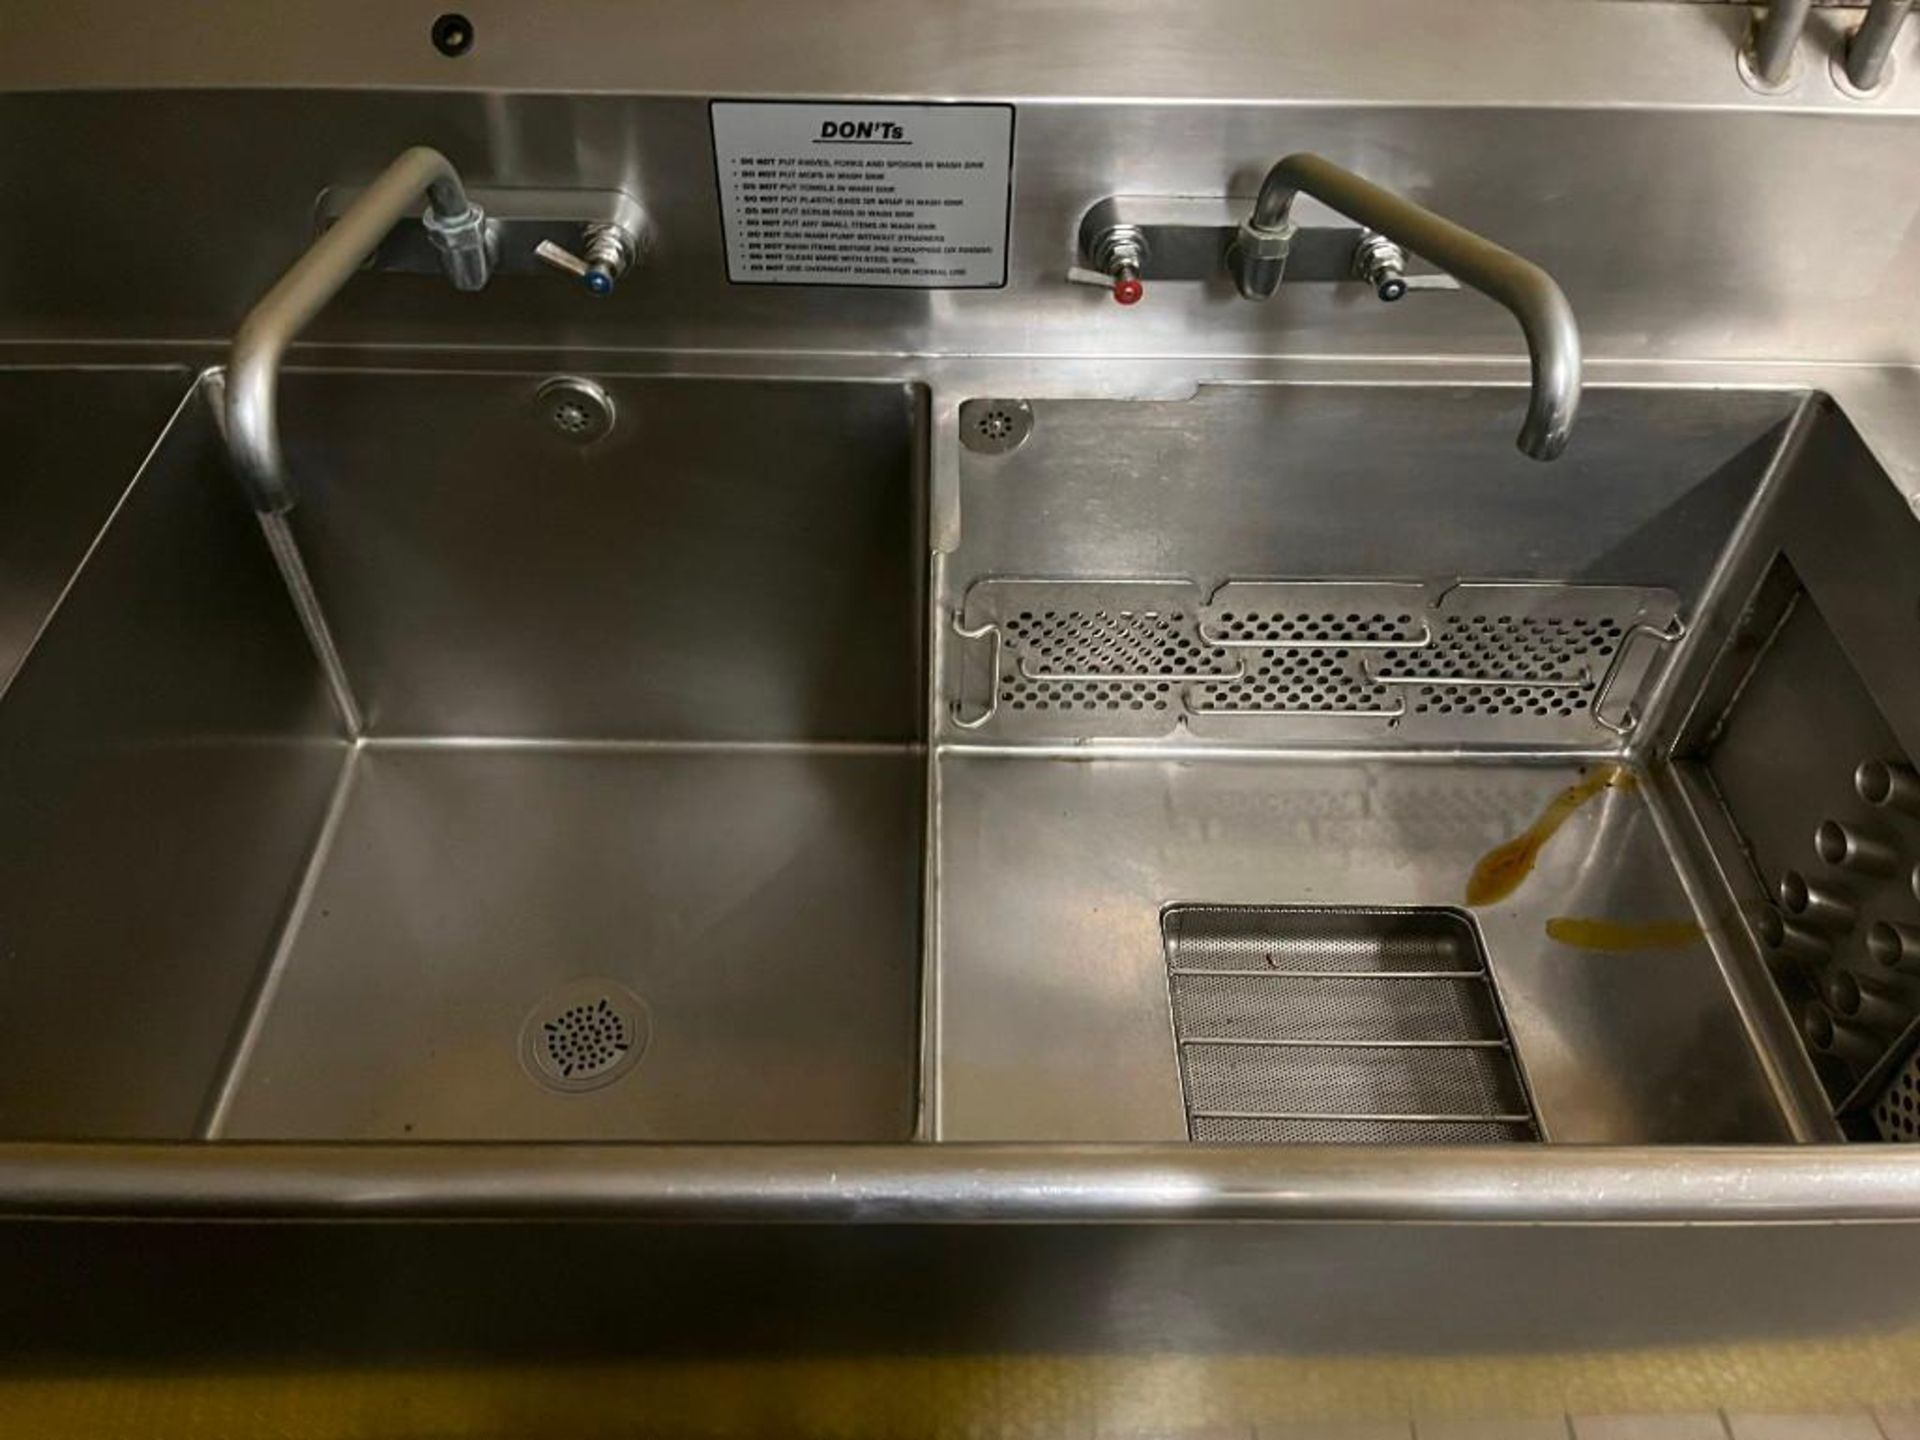 11' x 34" Hubart Stainless Steel 3 Basin Turbo Wash Station Mdl. TW11 - Image 3 of 8